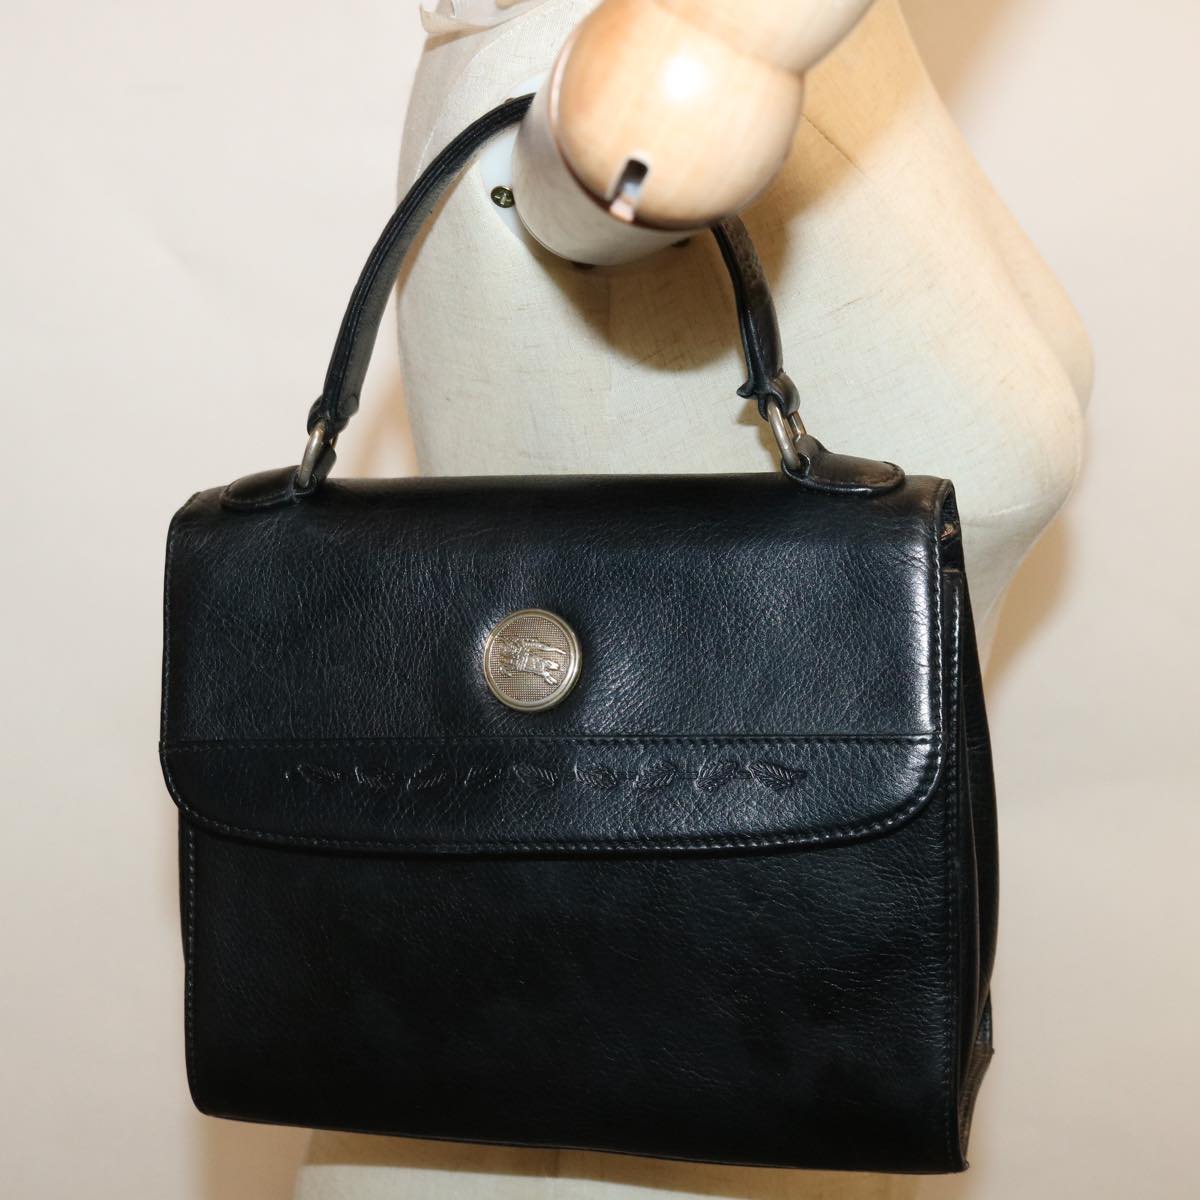 Burberrys Hand Bag Leather Black Auth 67181